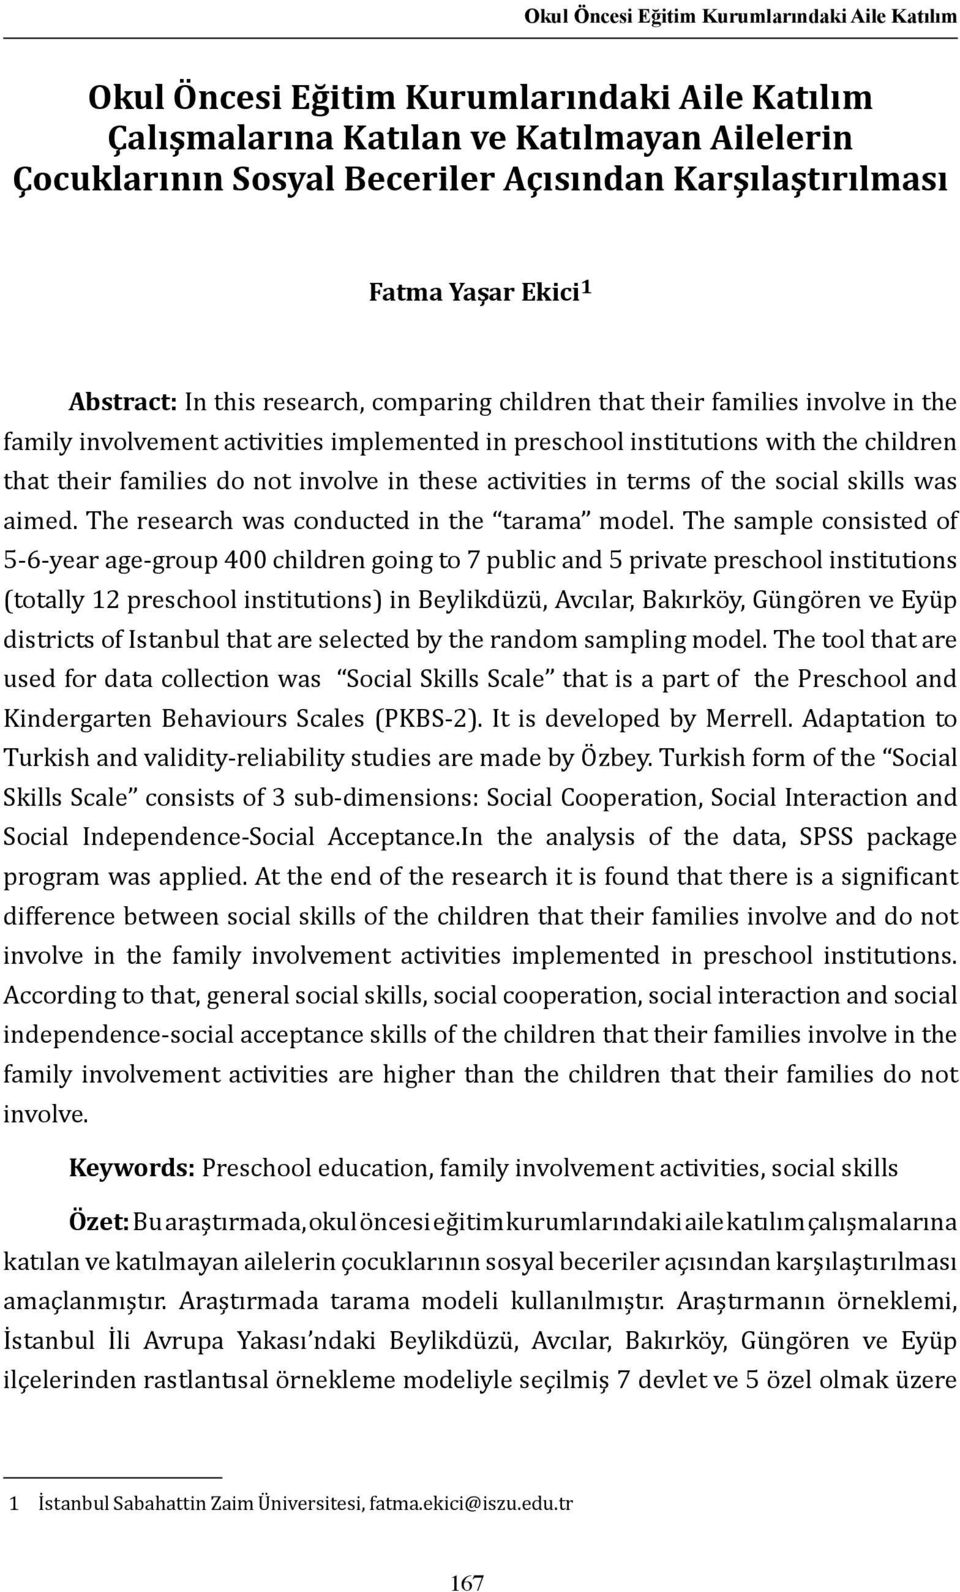 families do not involve in these activities in terms of the social skills was aimed. The research was conducted in the tarama model.